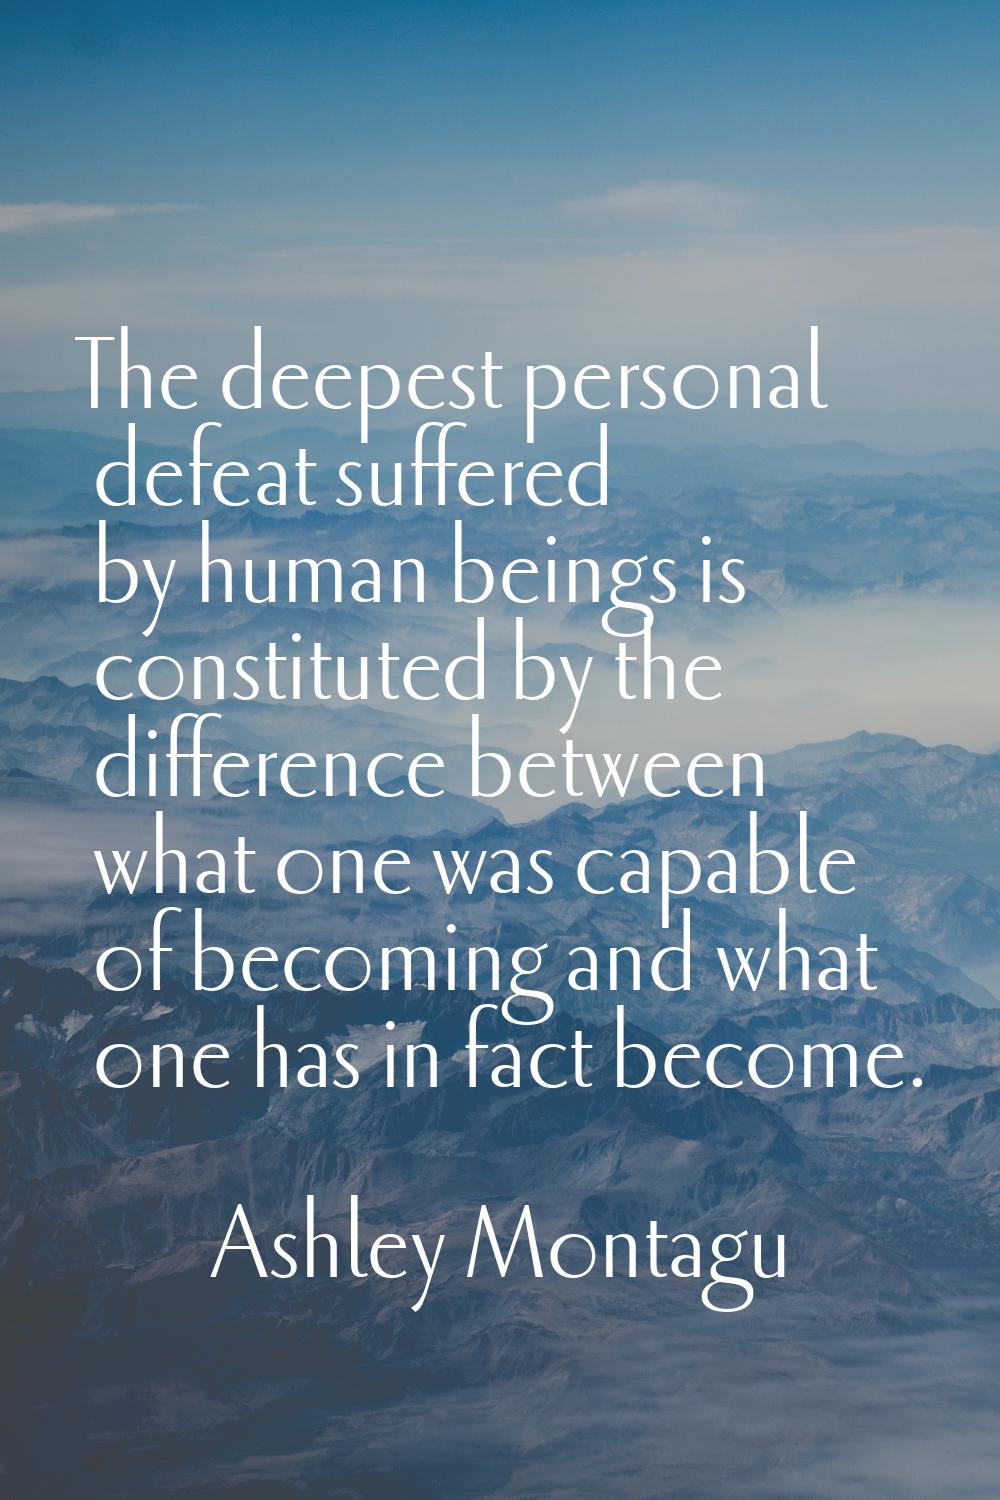 The deepest personal defeat suffered by human beings is constituted by the difference between what 